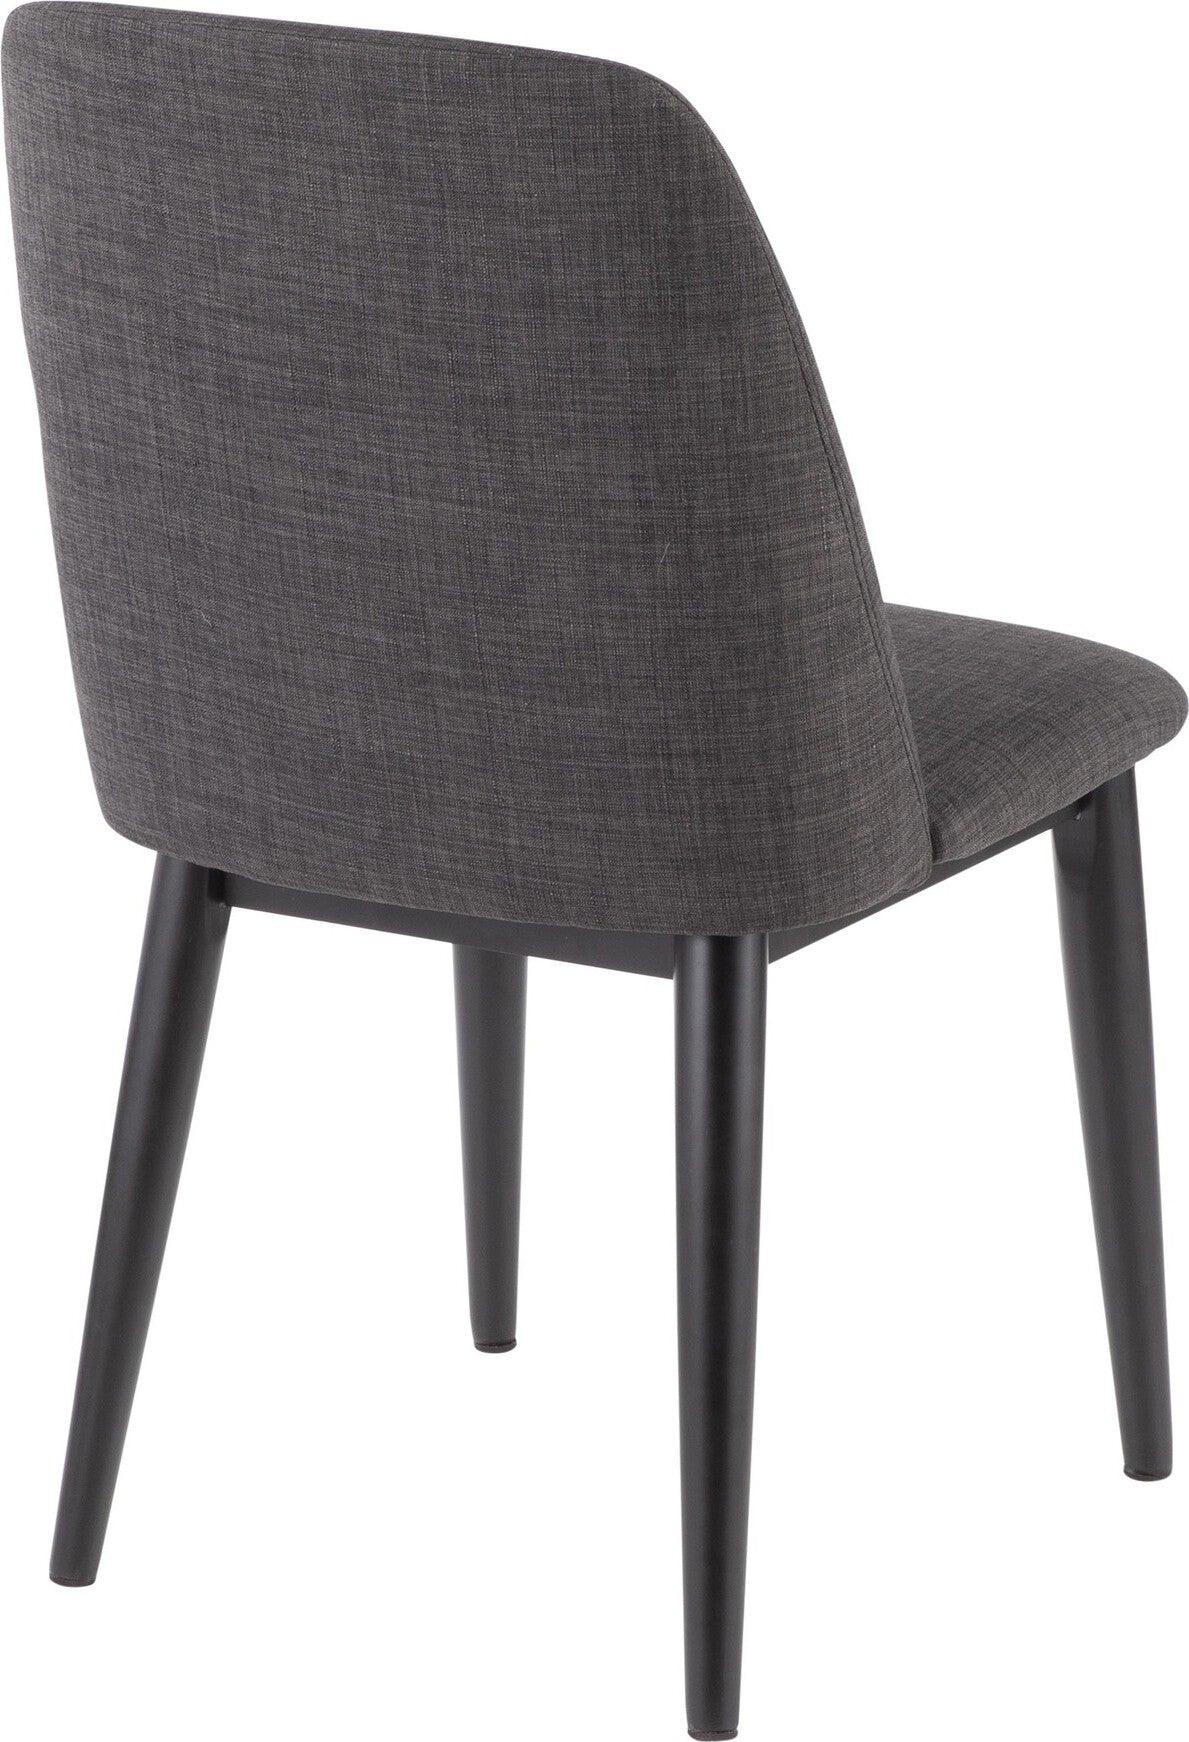 Lumisource Dining Chairs - Tintori Contemporary Dining Chair in Charcoal Fabric (Set of 2)